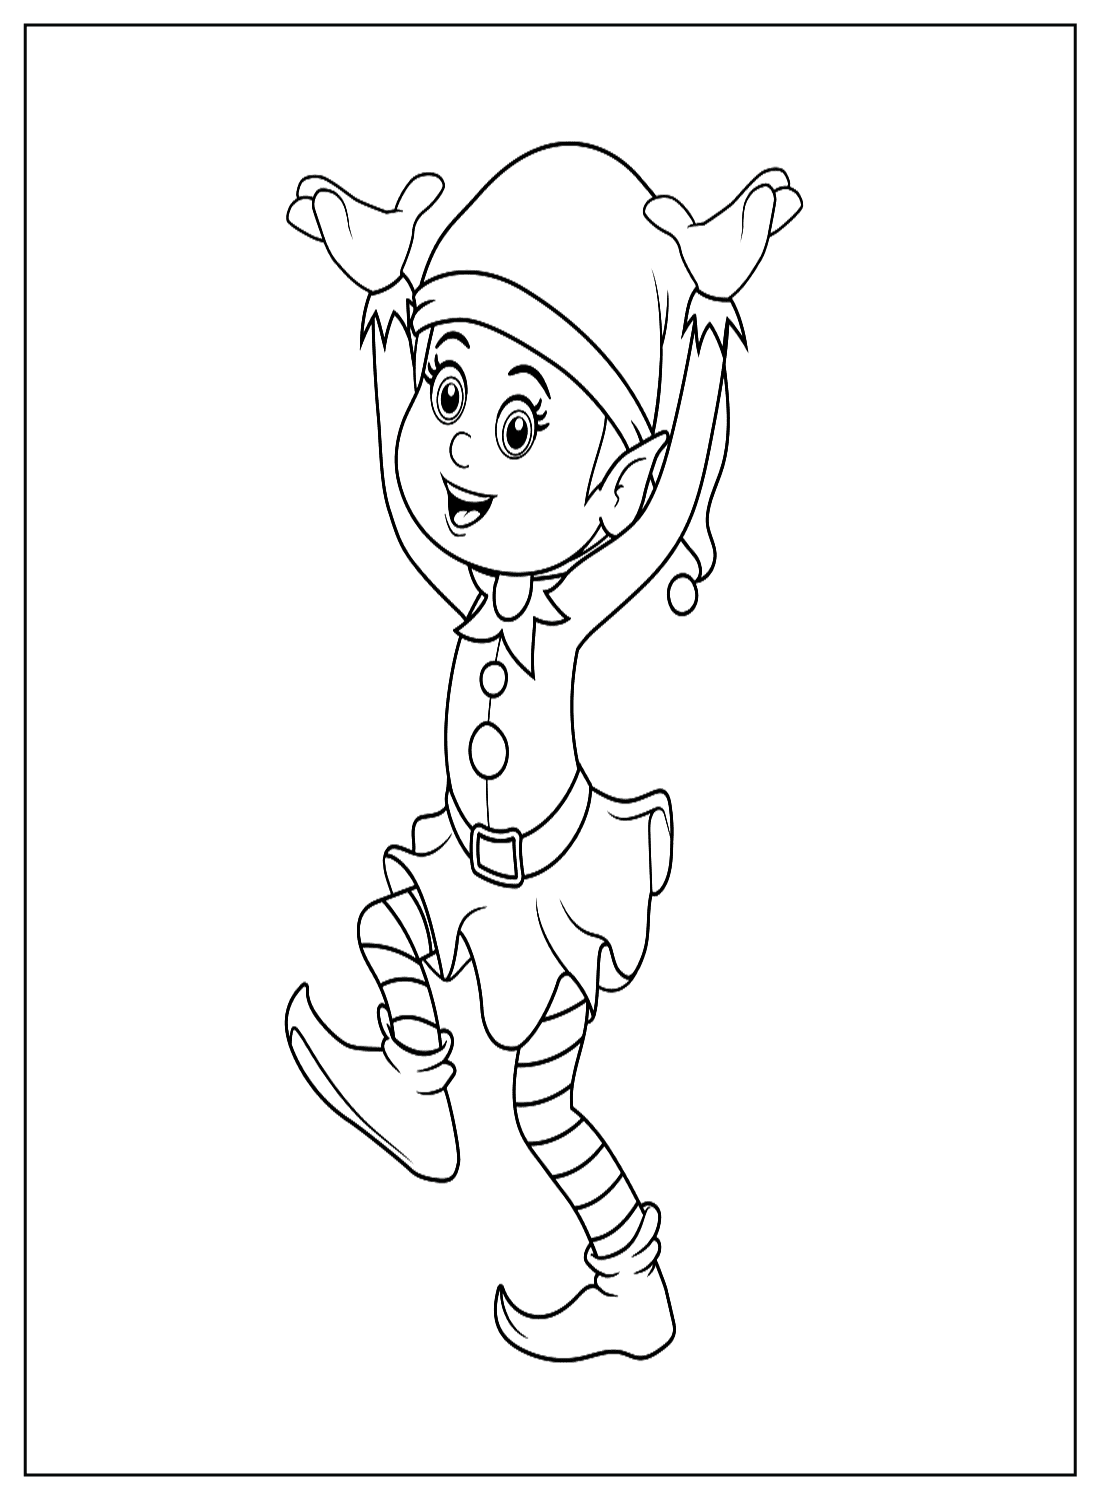 Free Elf Coloring Page - Free Printable Coloring Pages